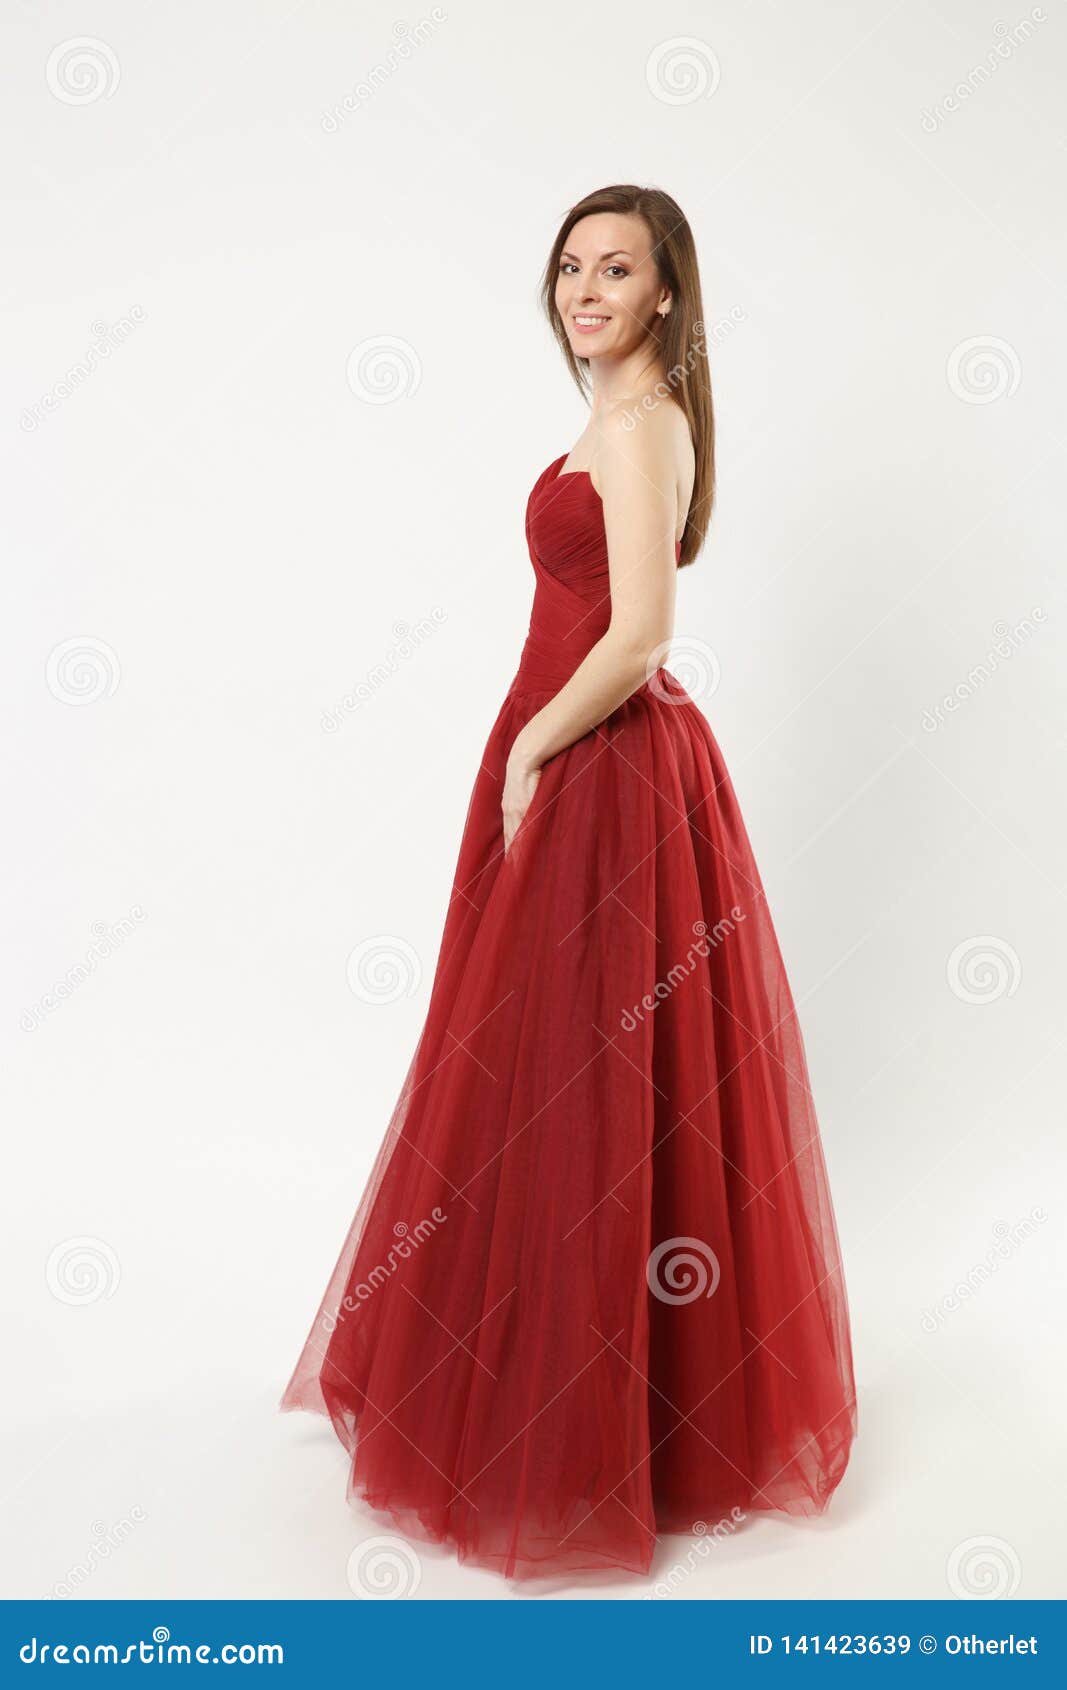 Full length photo of fashion model woman wearing elegant evening dress gown  posing isolated on white